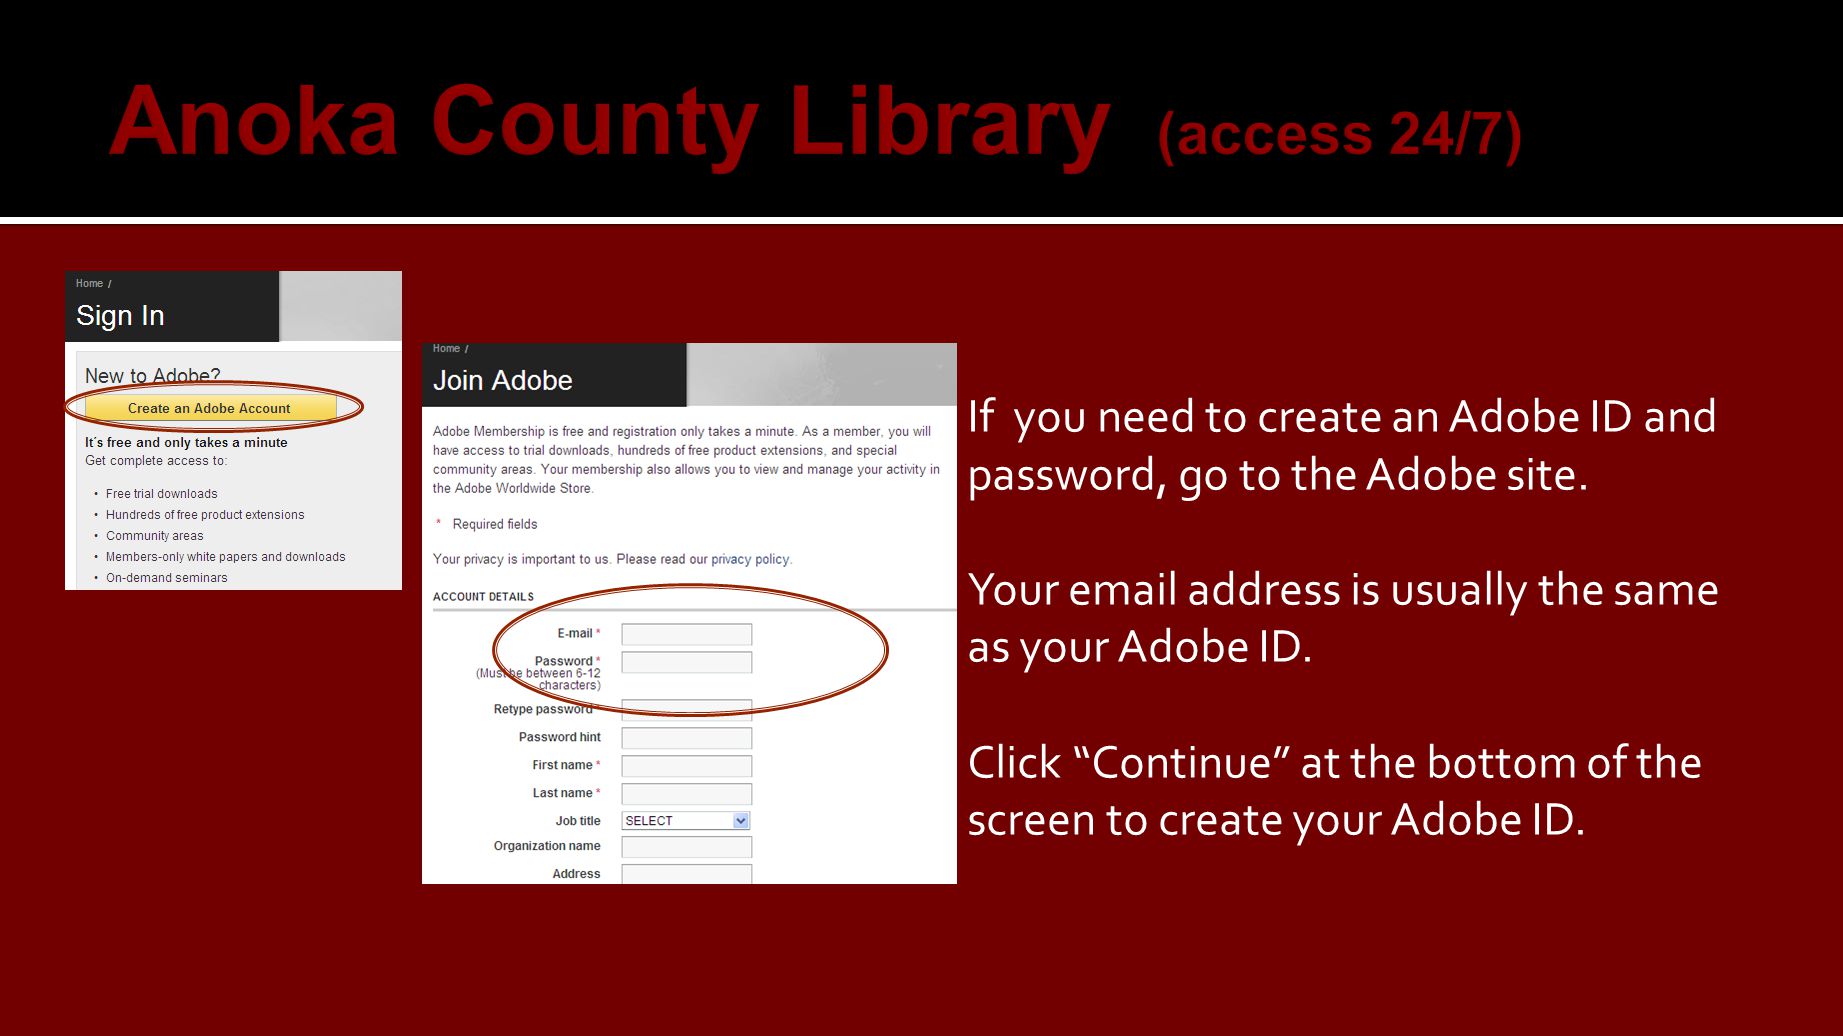 If you need to create an Adobe ID and password, go to the Adobe site.